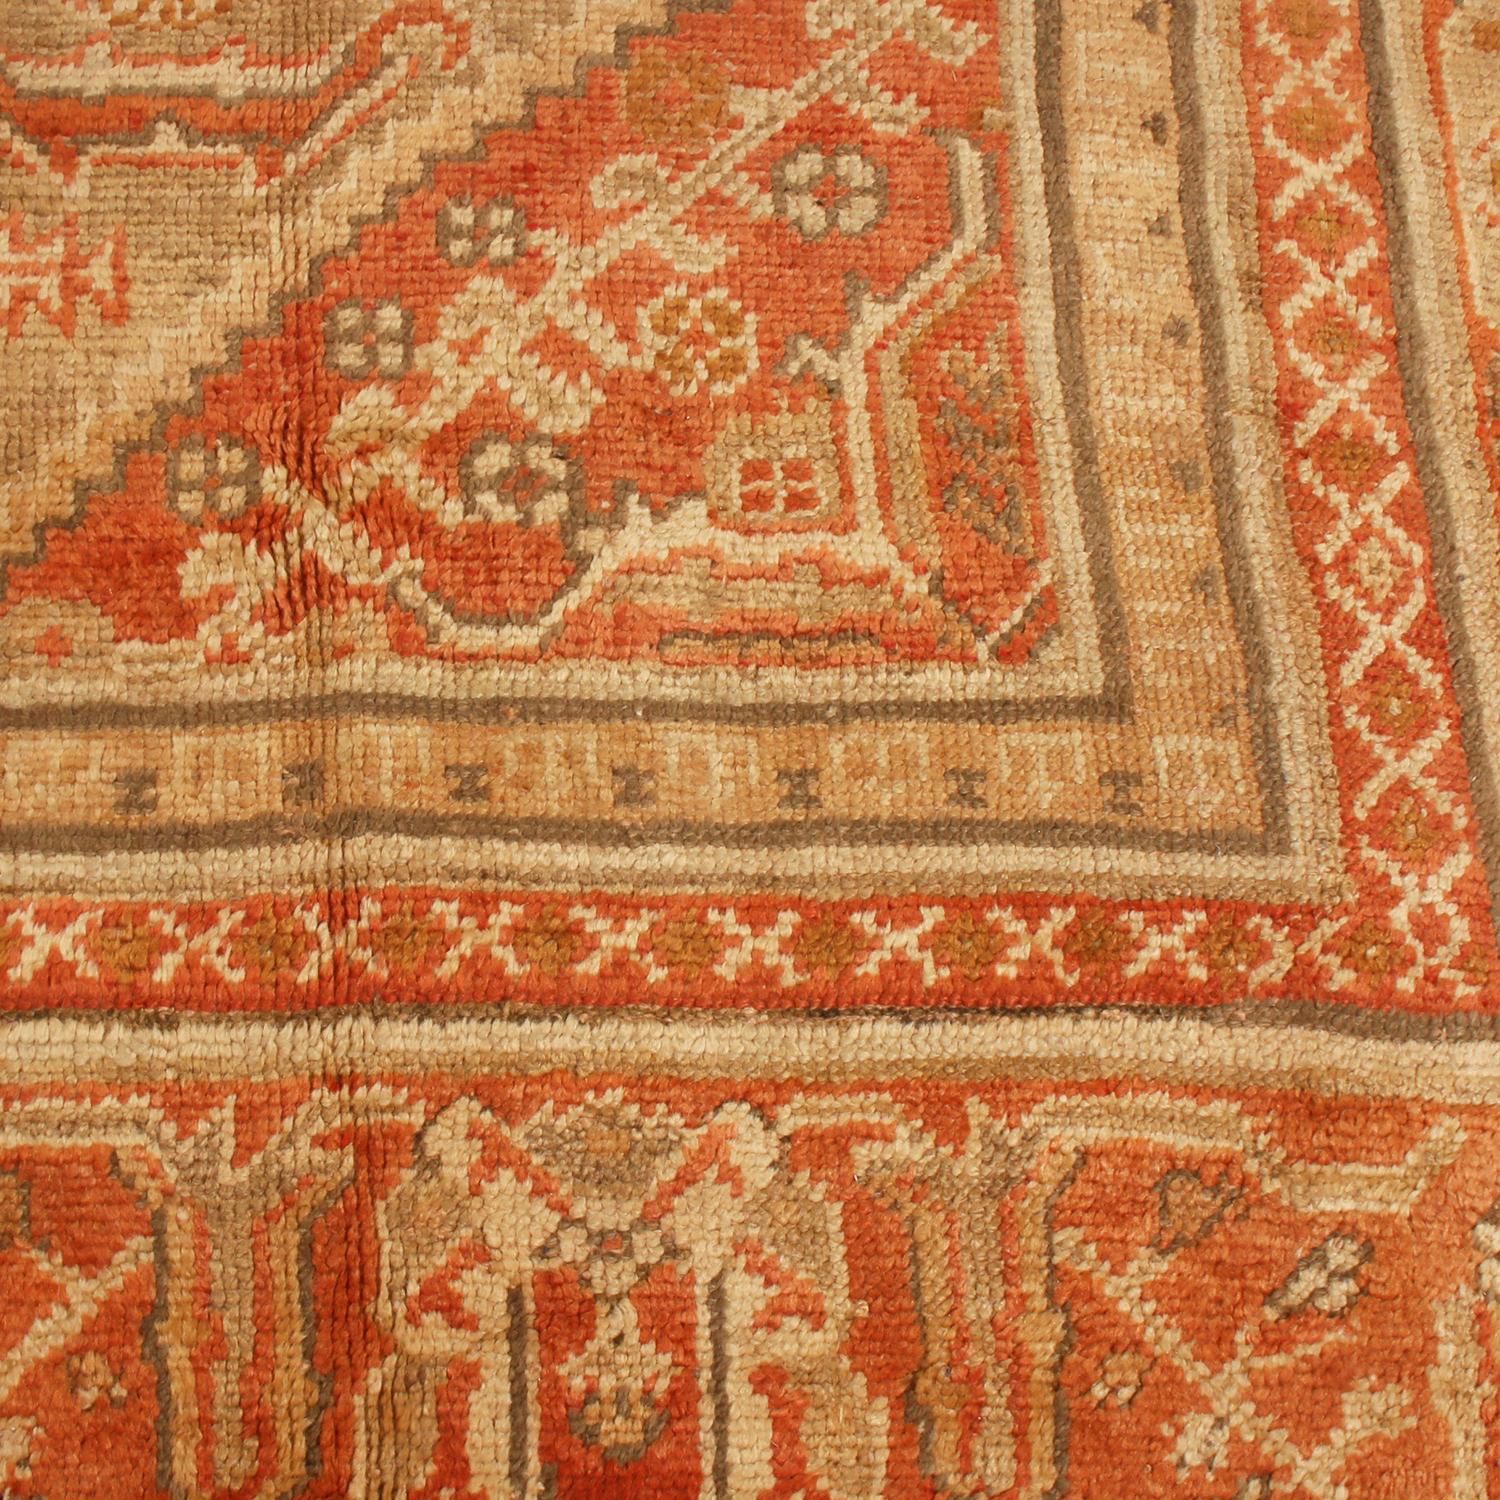 Late 19th Century Antique Oushak Beige and Red Wool Rug with Medallion Field Design by Rug & Kilim For Sale